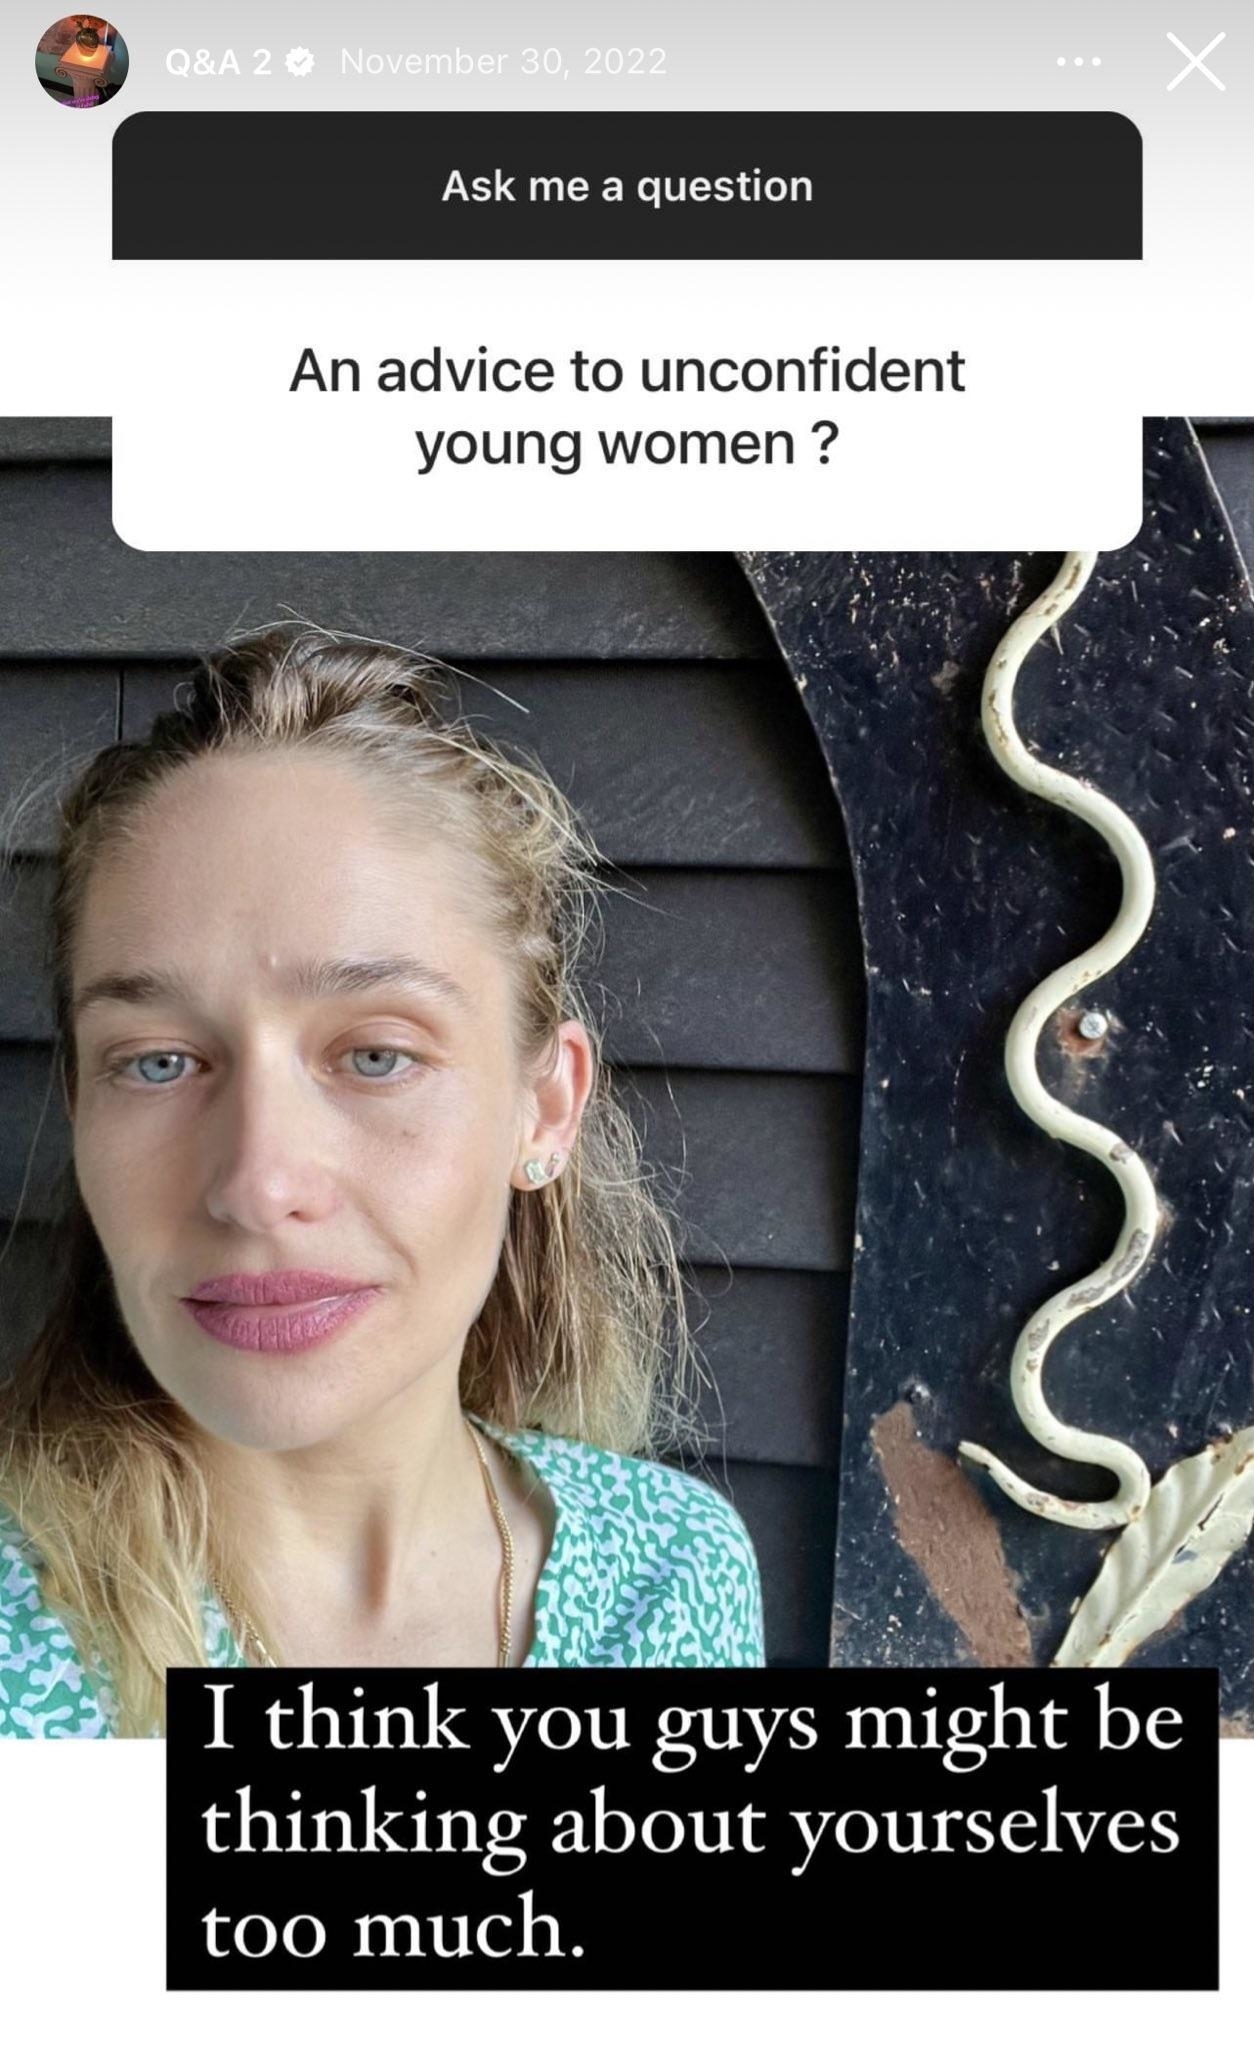 Selfie of a woman responding to a question about advice for young women, suggesting they think about themselves too much